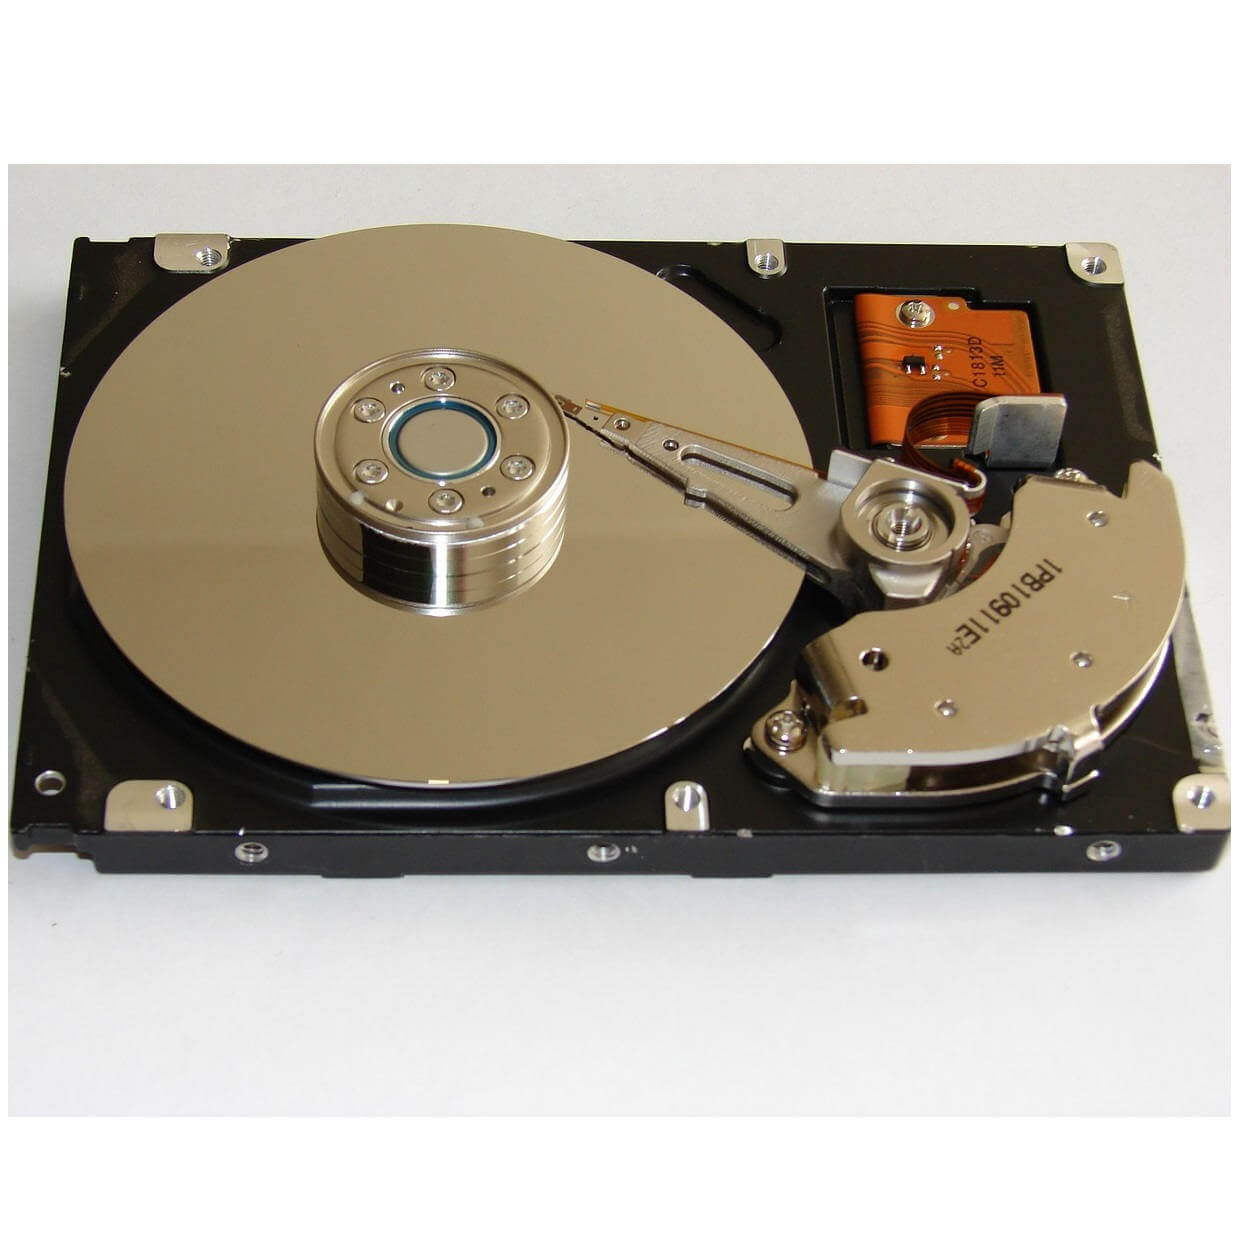 Cara Perbaiki Disk Boot Failure Insert System Disk And Press Enter